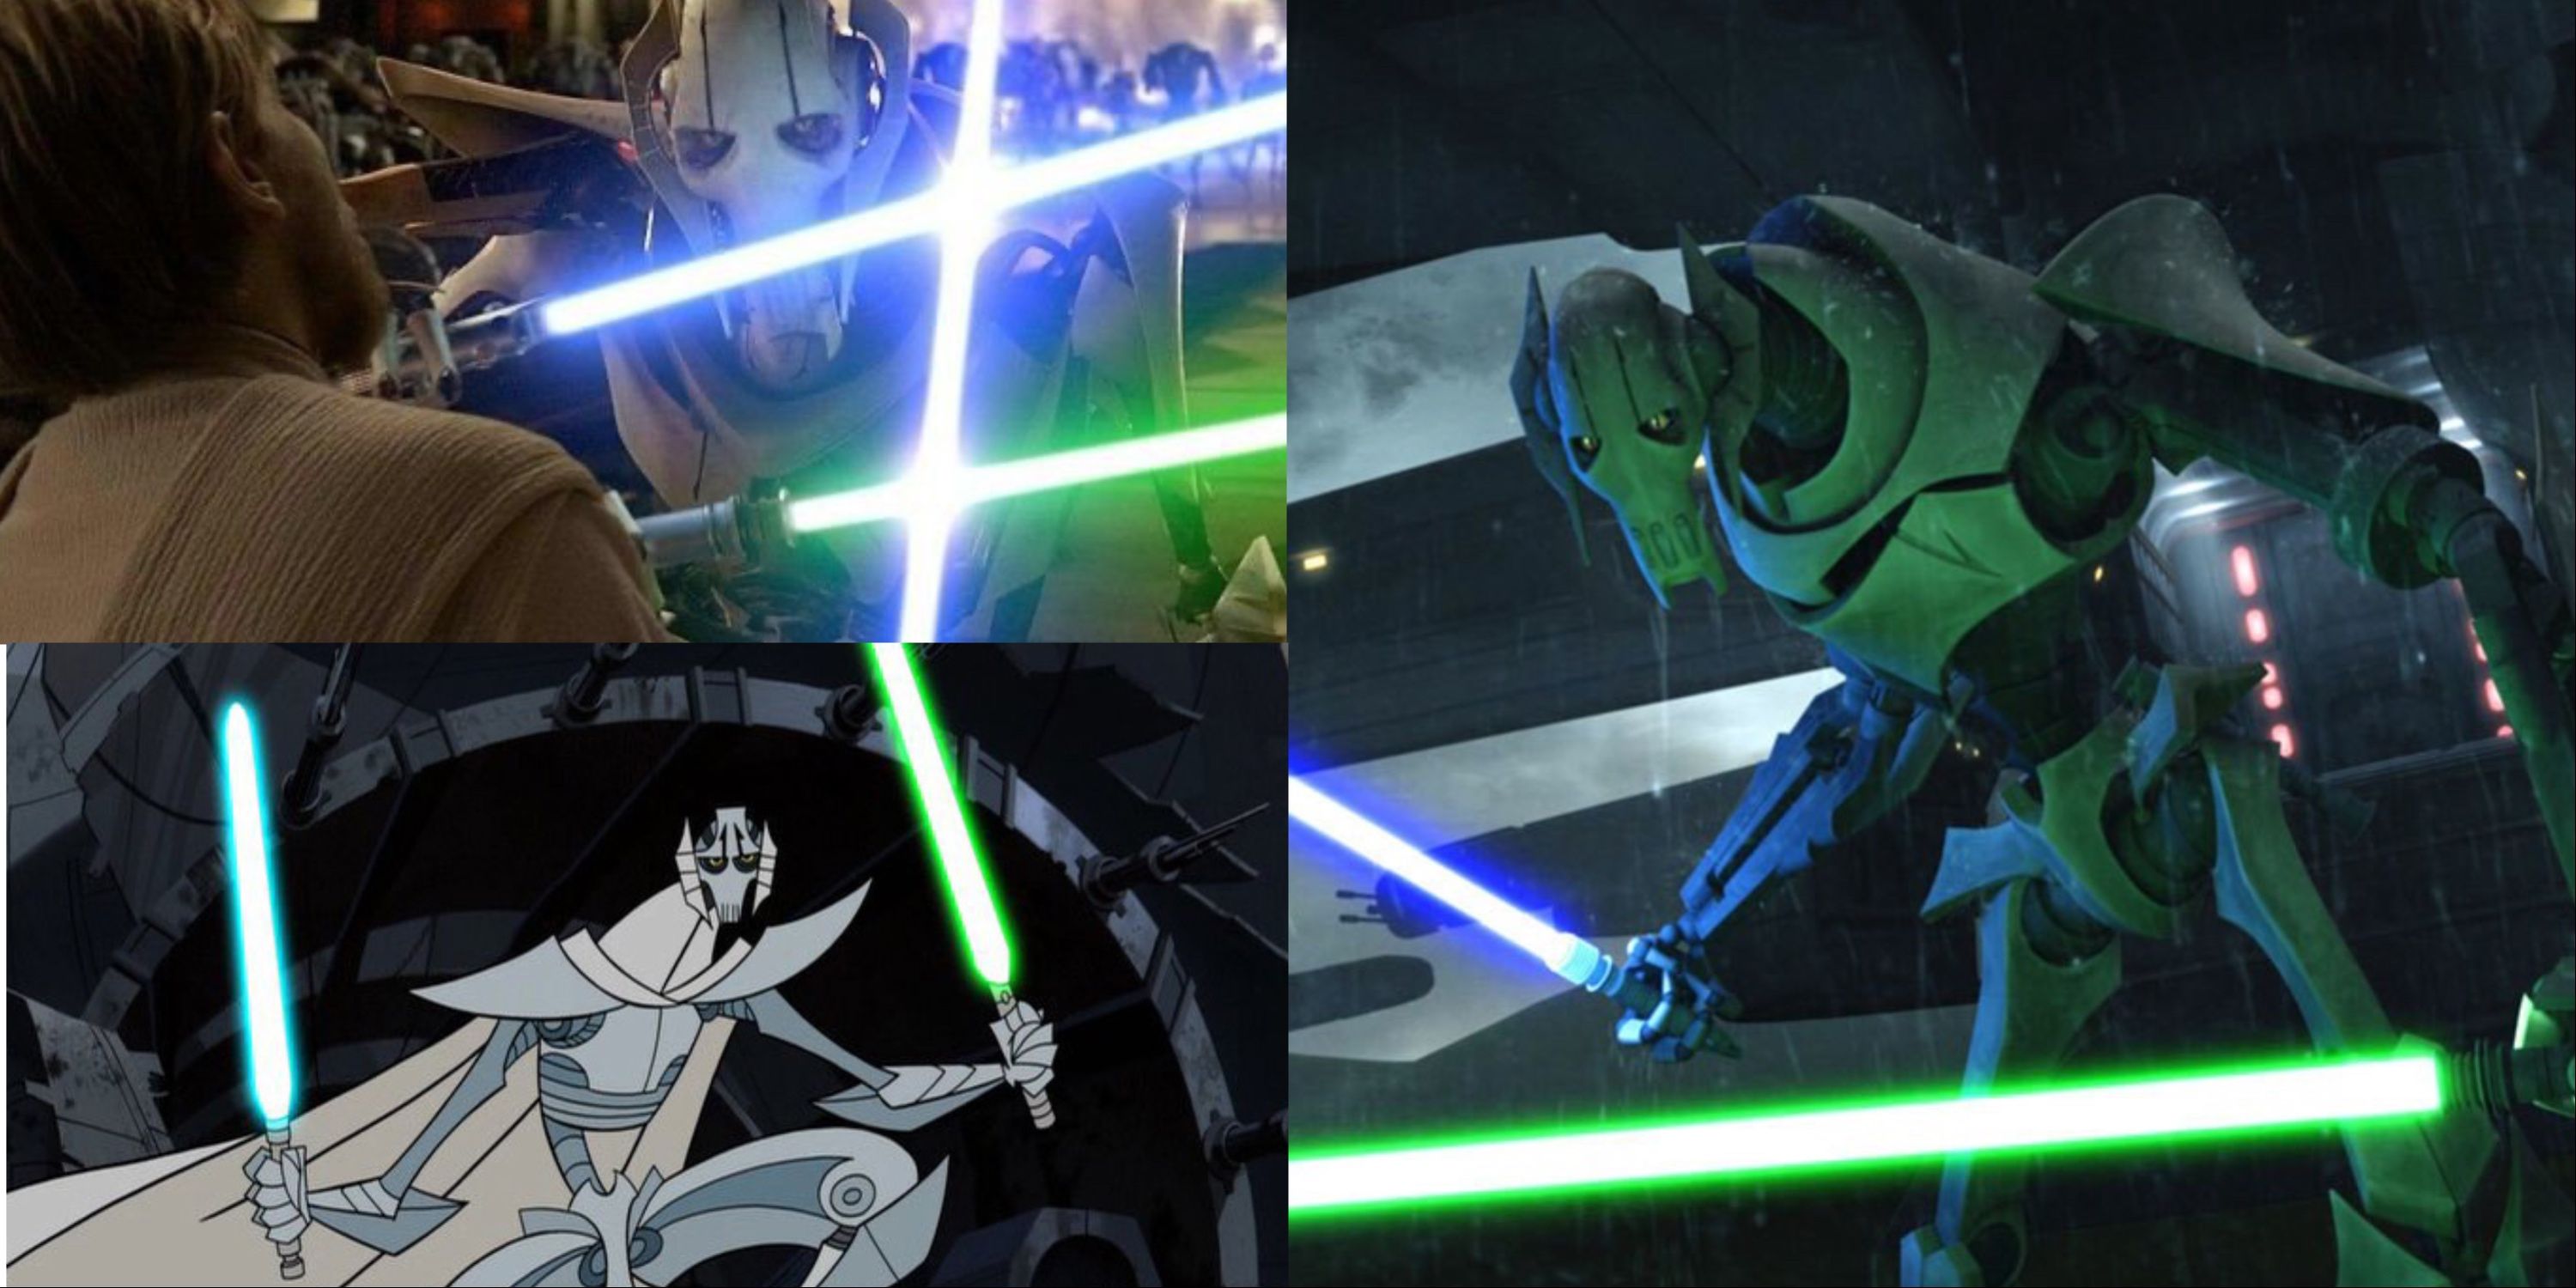 grievous wields dual blades and fights Obi-wan